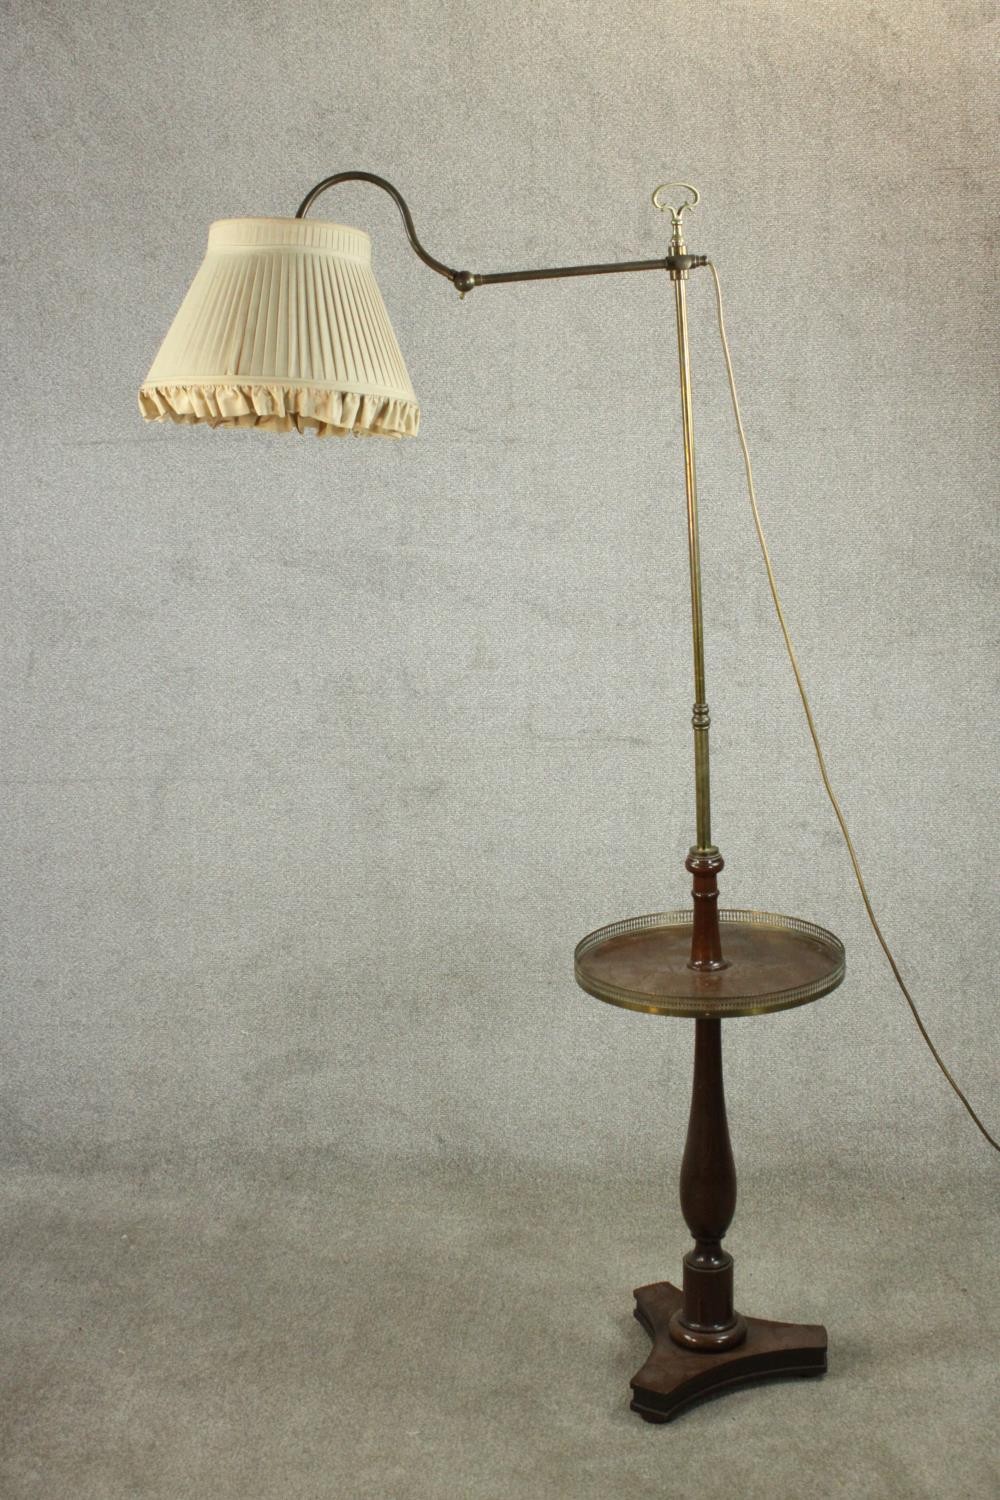 An adjustable standard lamp, with a brass arm and stem, over a circular tier with a pierced brass